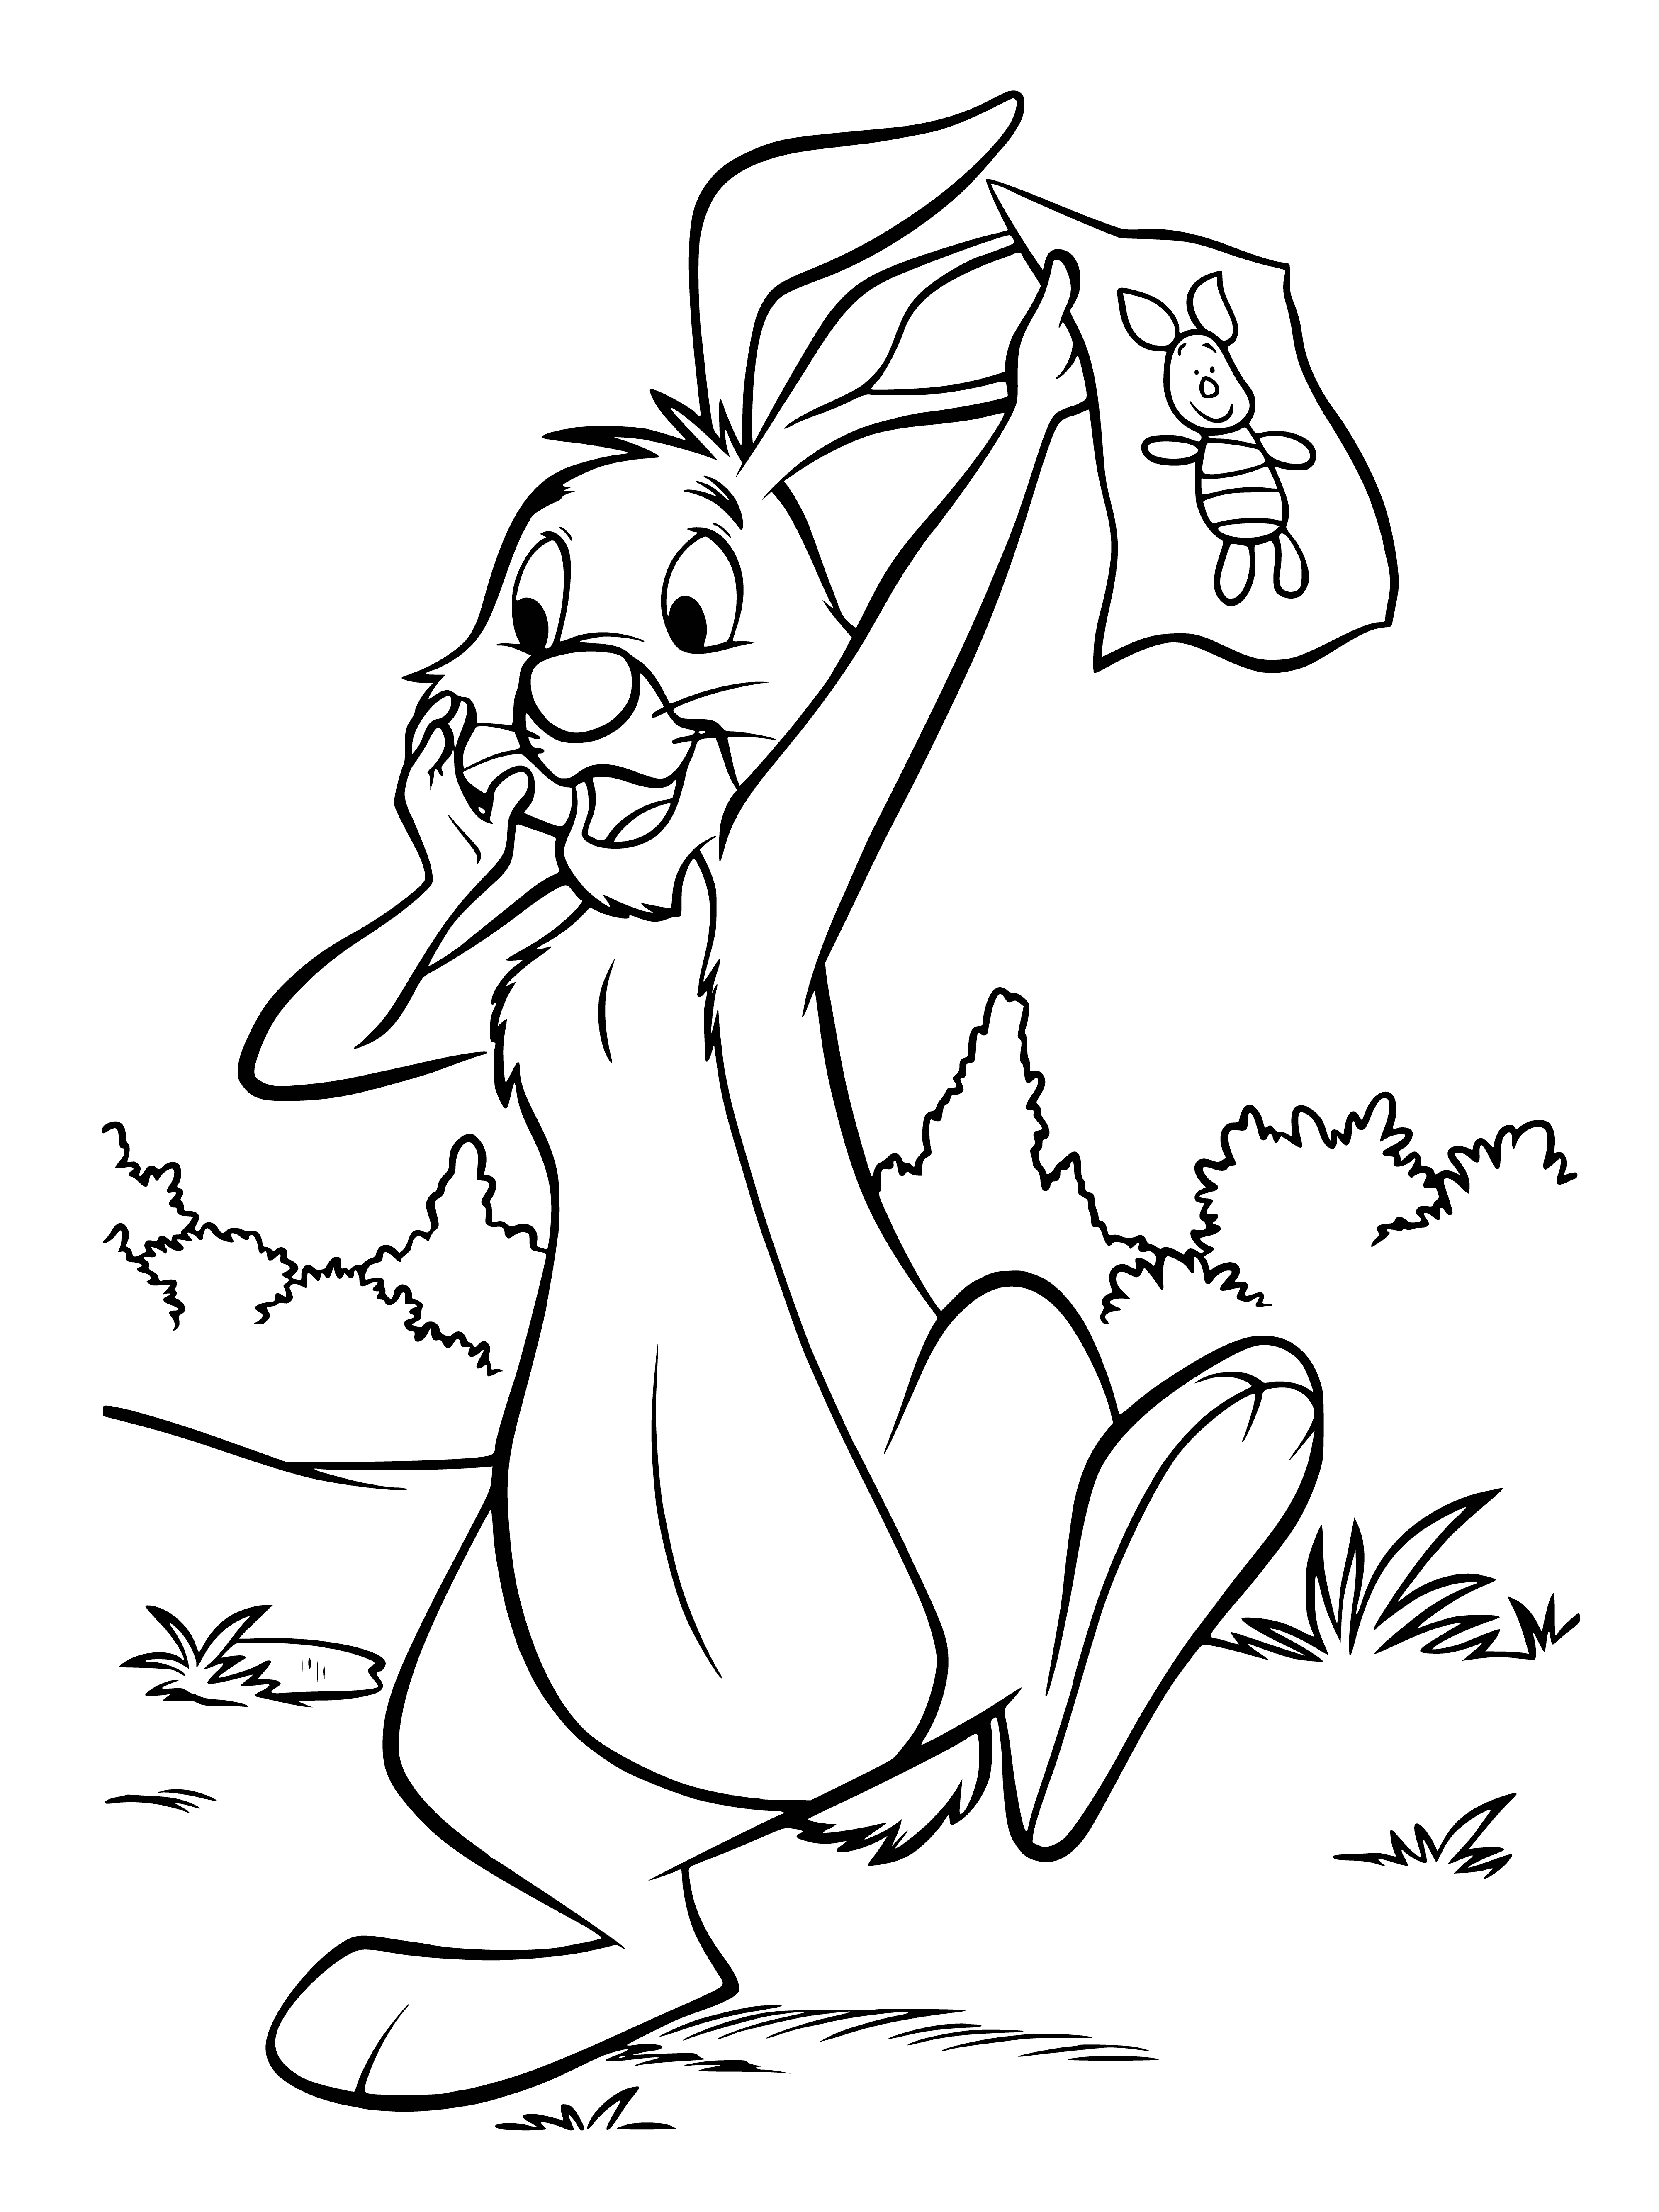 coloring page: Rabbit in red shirt has arms crossed, big nose and ears, looks like he's deep in thought.